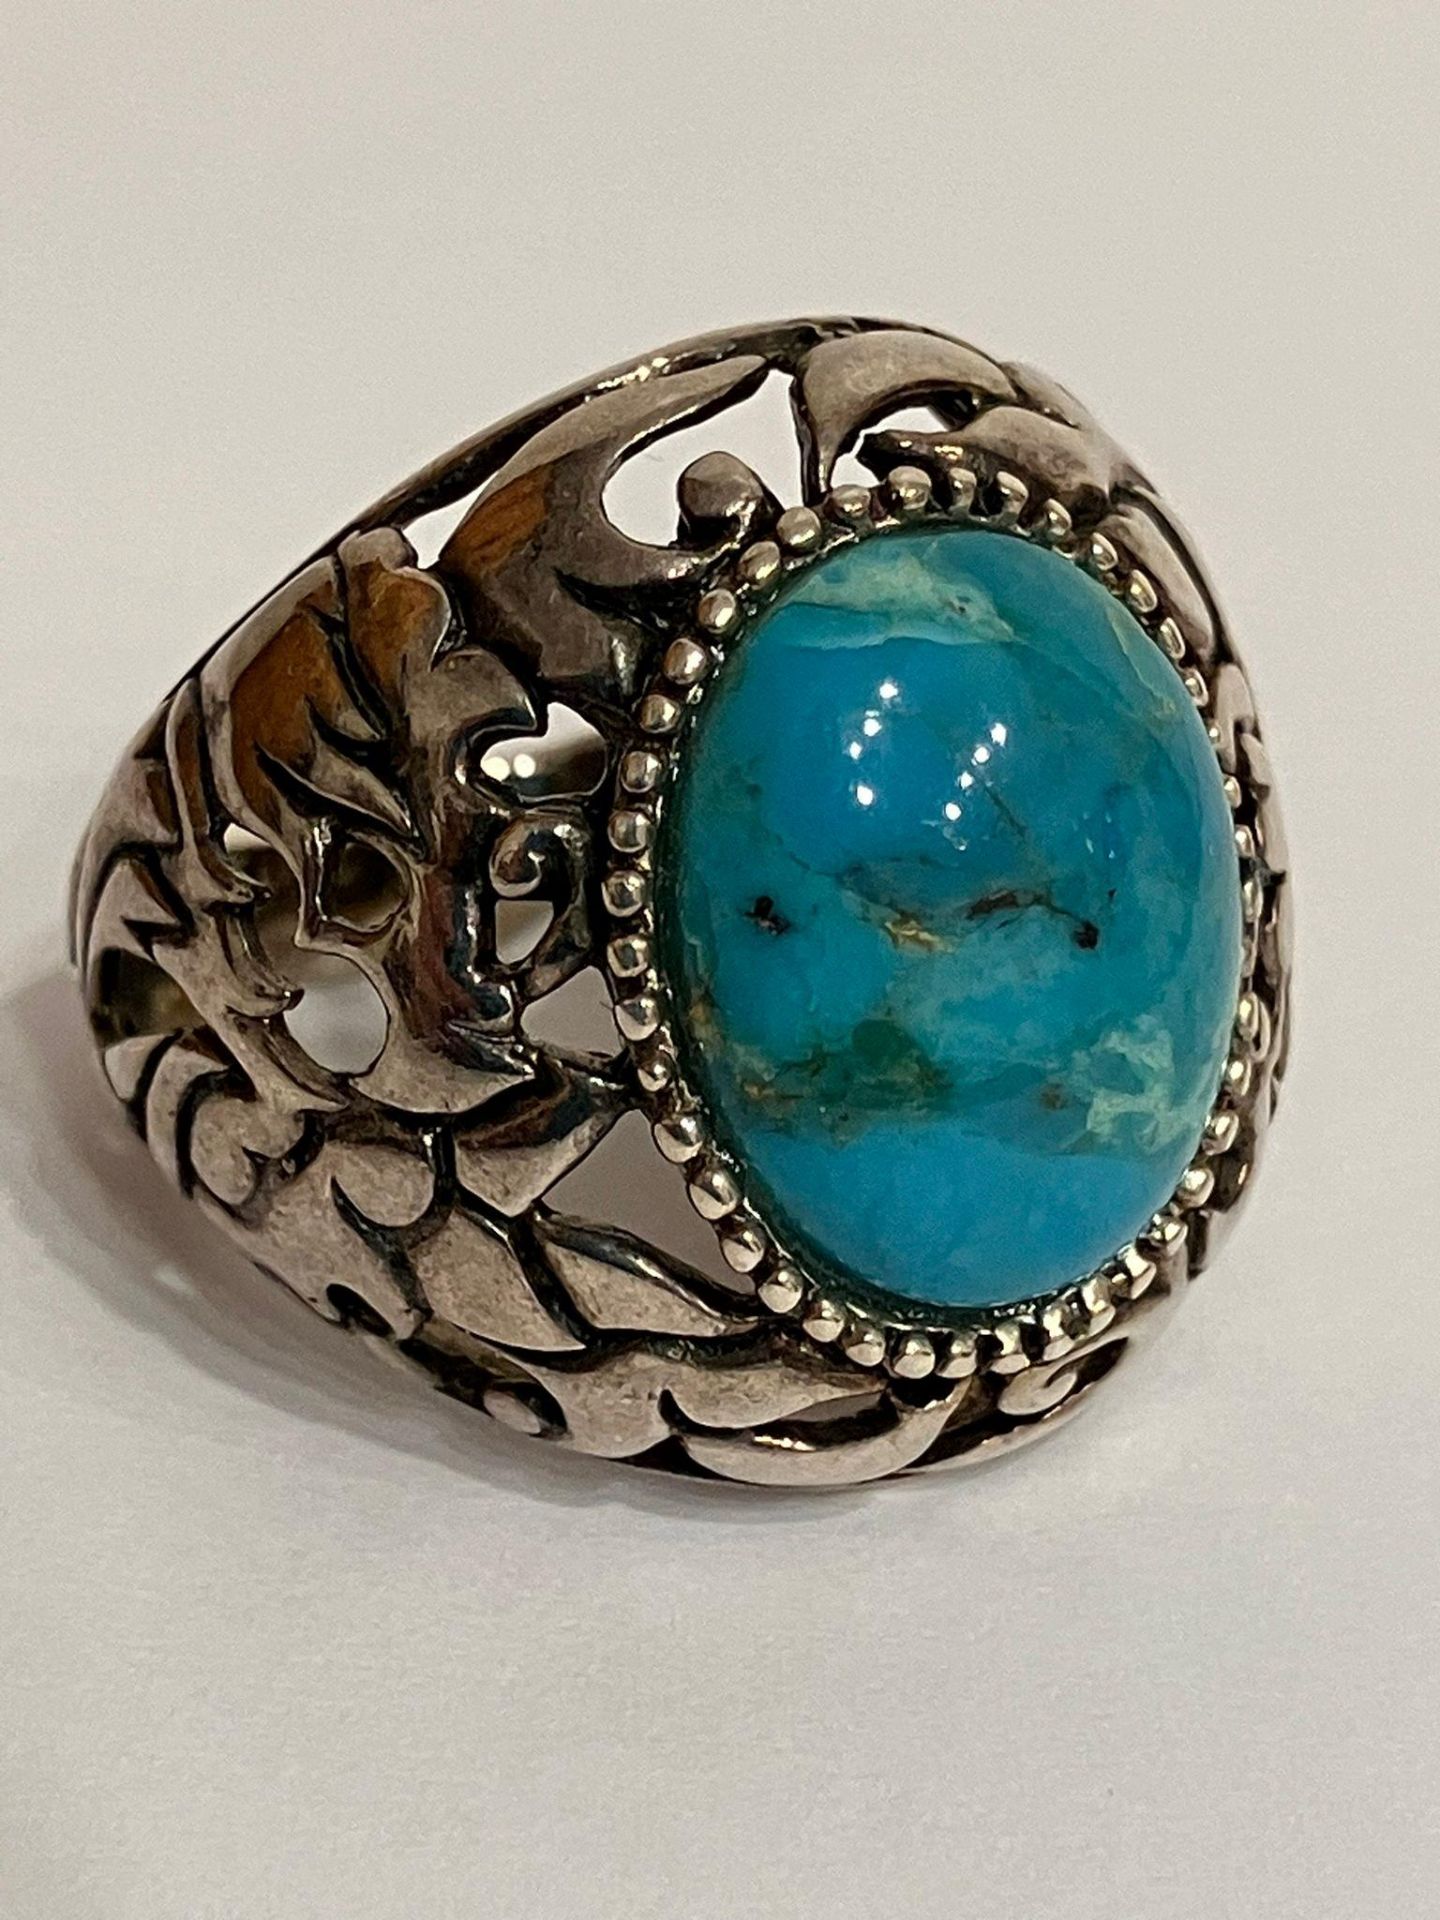 Vintage SILVER and TURQUOISE RING. Consisting a large Oval polished TURQUOISE set into a wide SILVER